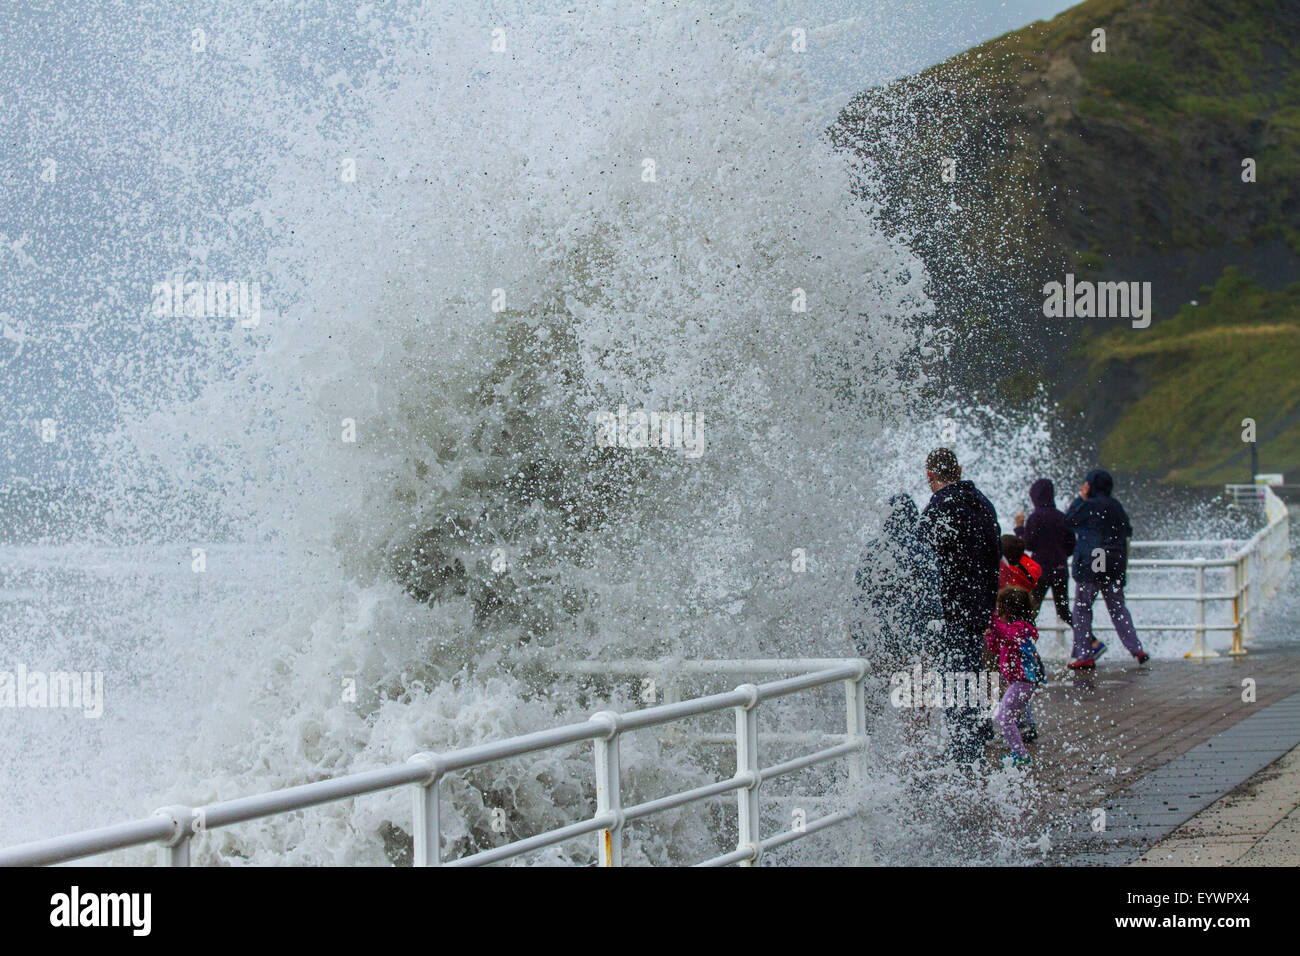 Aberystwyth, Wales, UK. 4 August 2015. Stormy Weather.  A 5-8 ft swell, high winds and a high tide cmbine to lash Aberystwyth seafront with huge waves. A family on holiday play at dodging the waves on the seafront promenade Credit:  Alan Hale/Alamy Live News Stock Photo